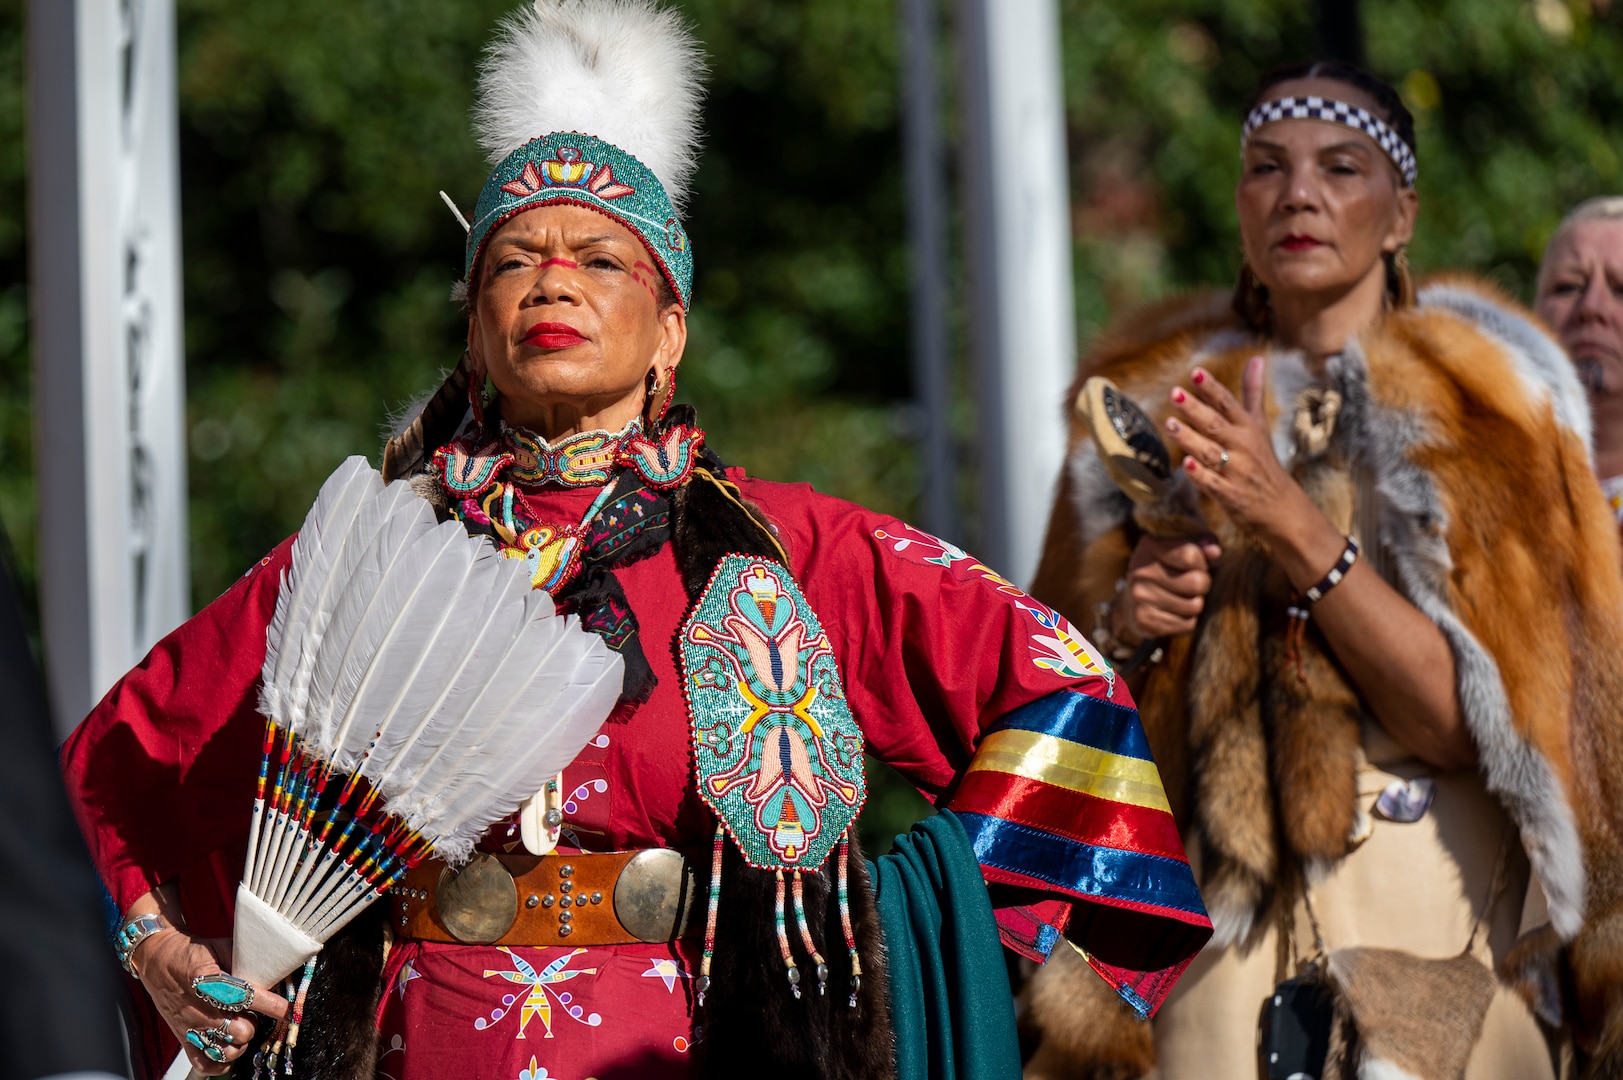 Two dancers in traditional native clothing stand outdoors.